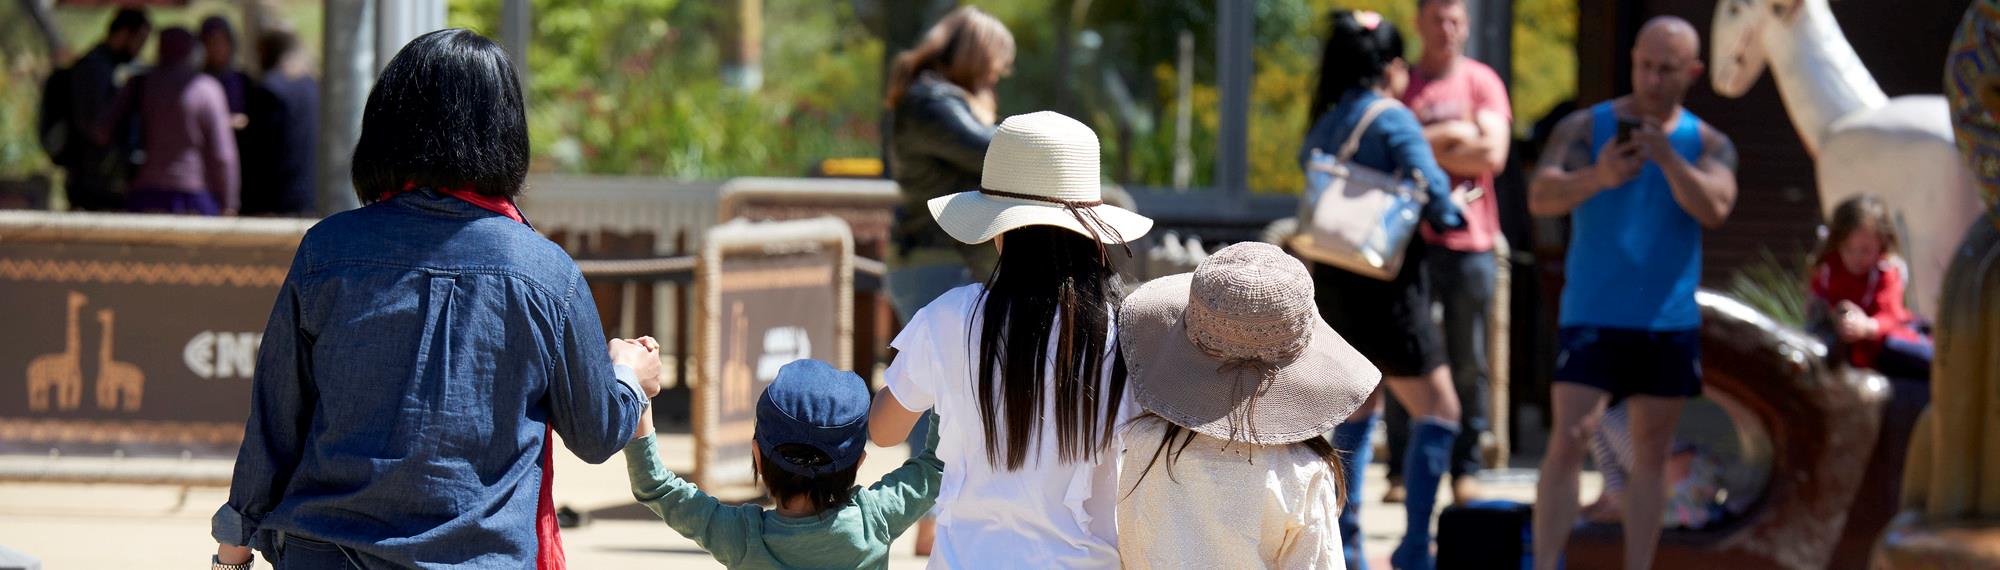 Family day out at Werribee Open Range Zoo. Visitors walking towards the entrance gate holding hands with young children.